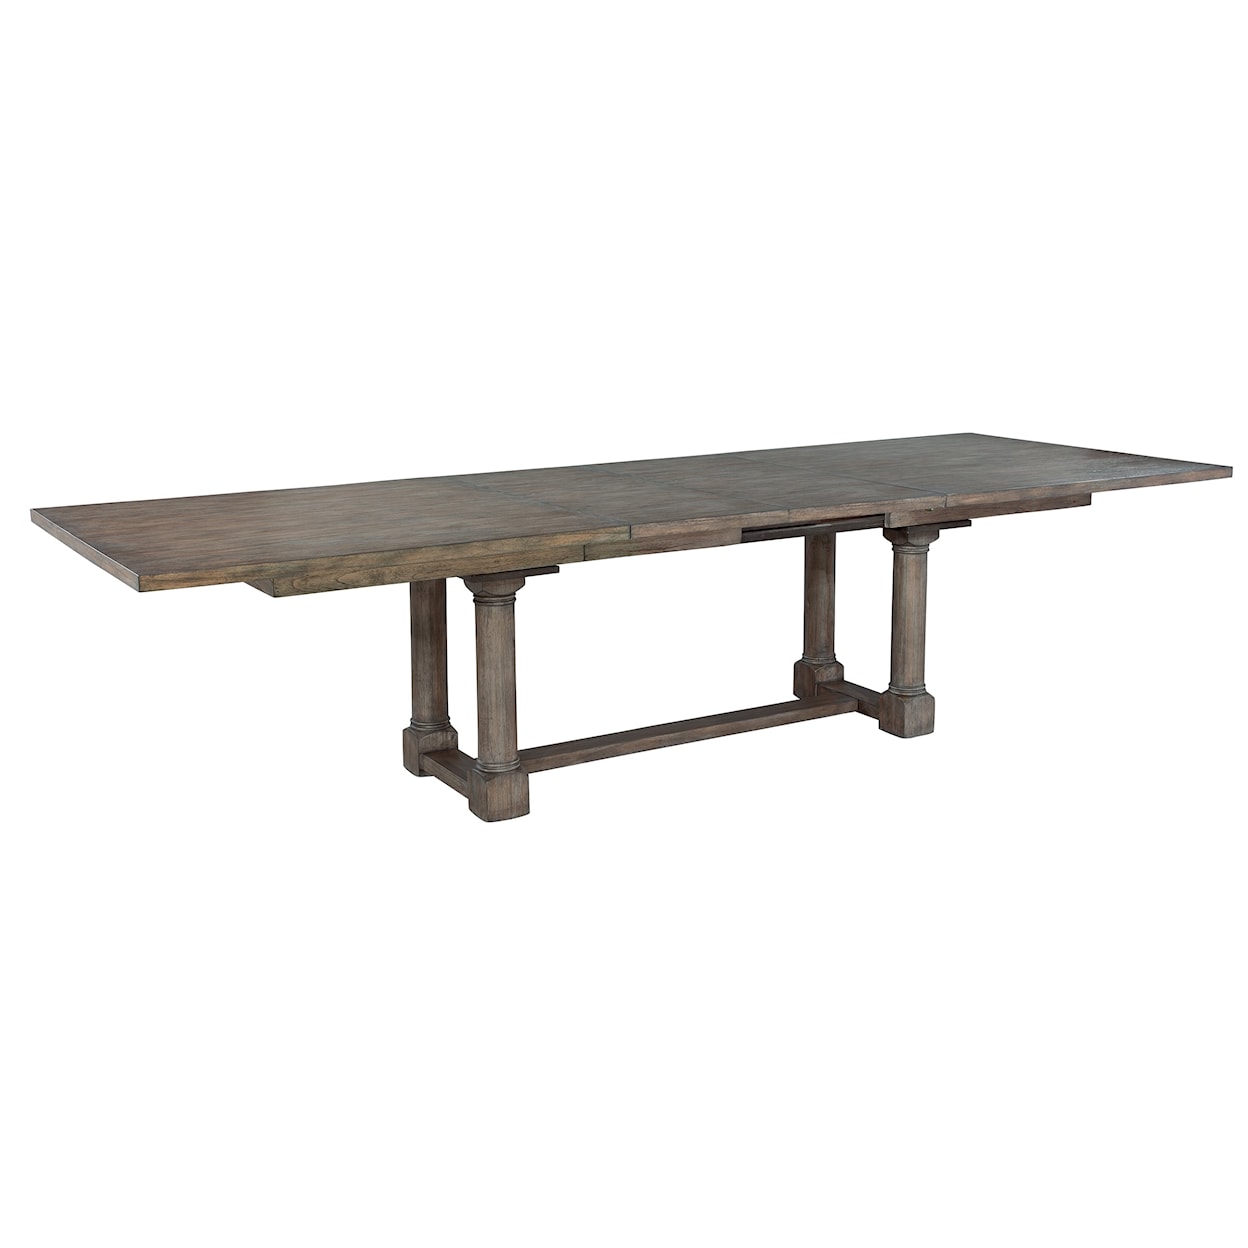 Hekman Lincoln Park Dining Table